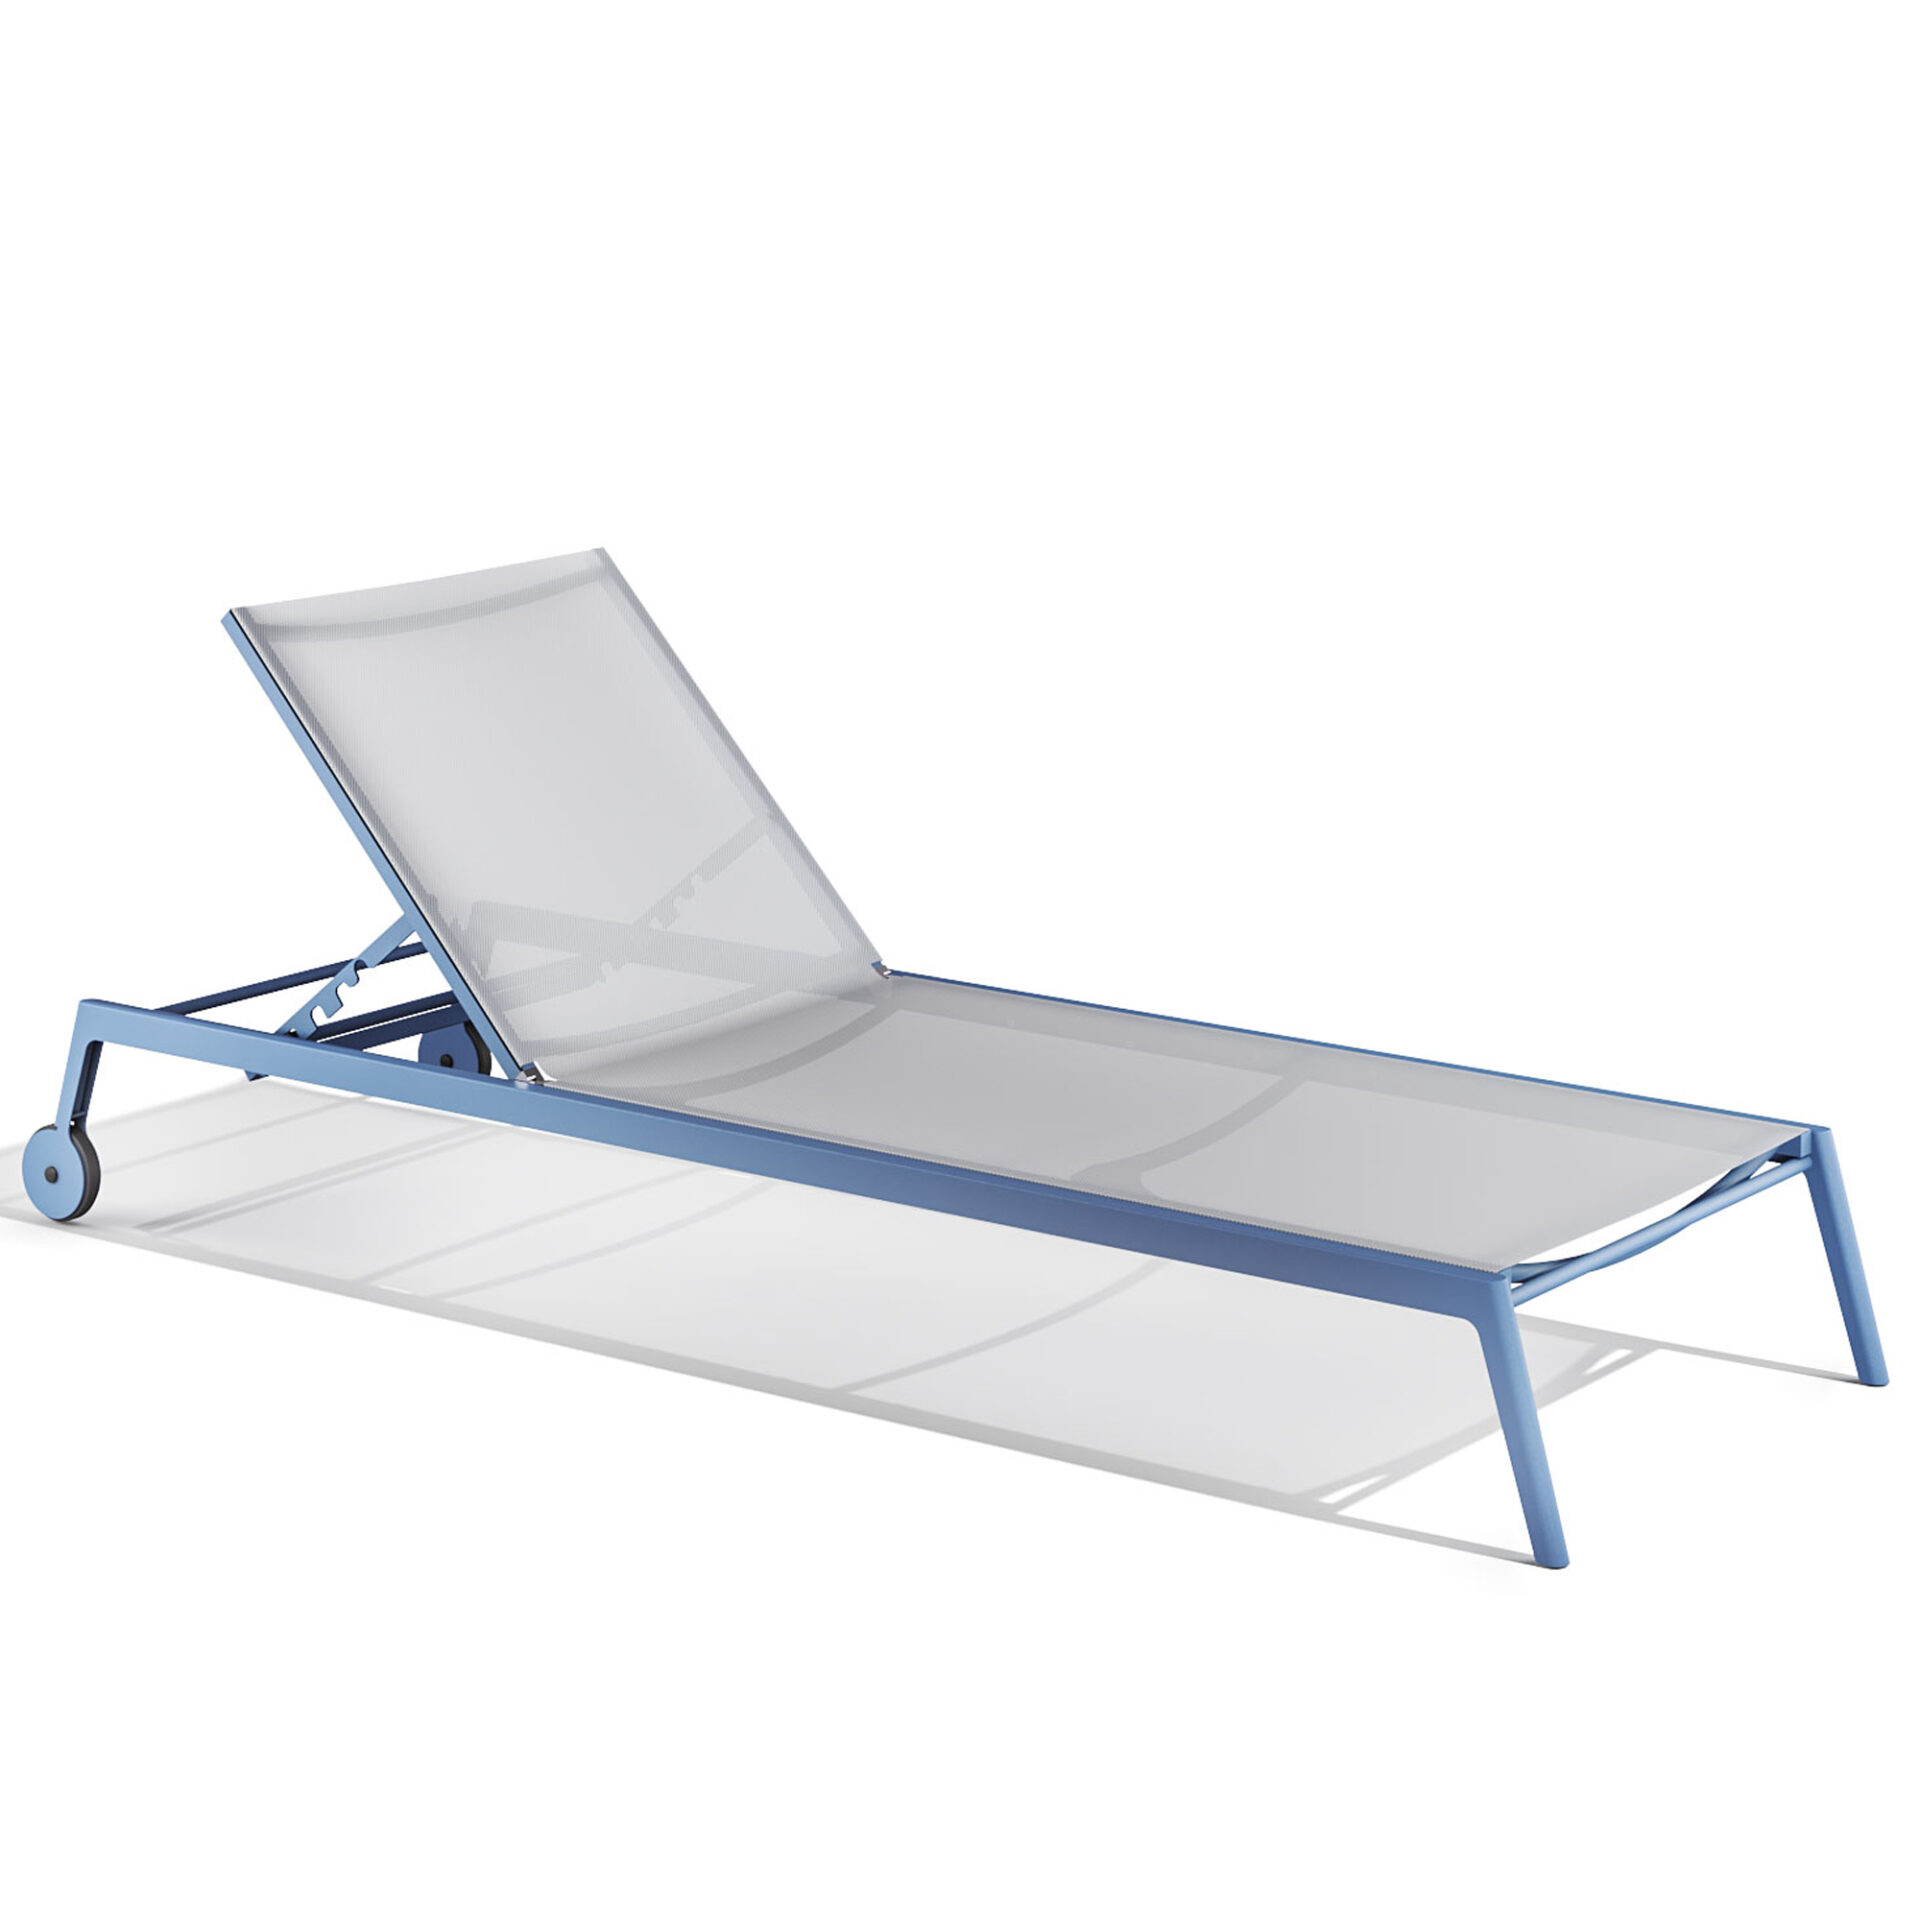 sun-lounger-with-wheels-gao